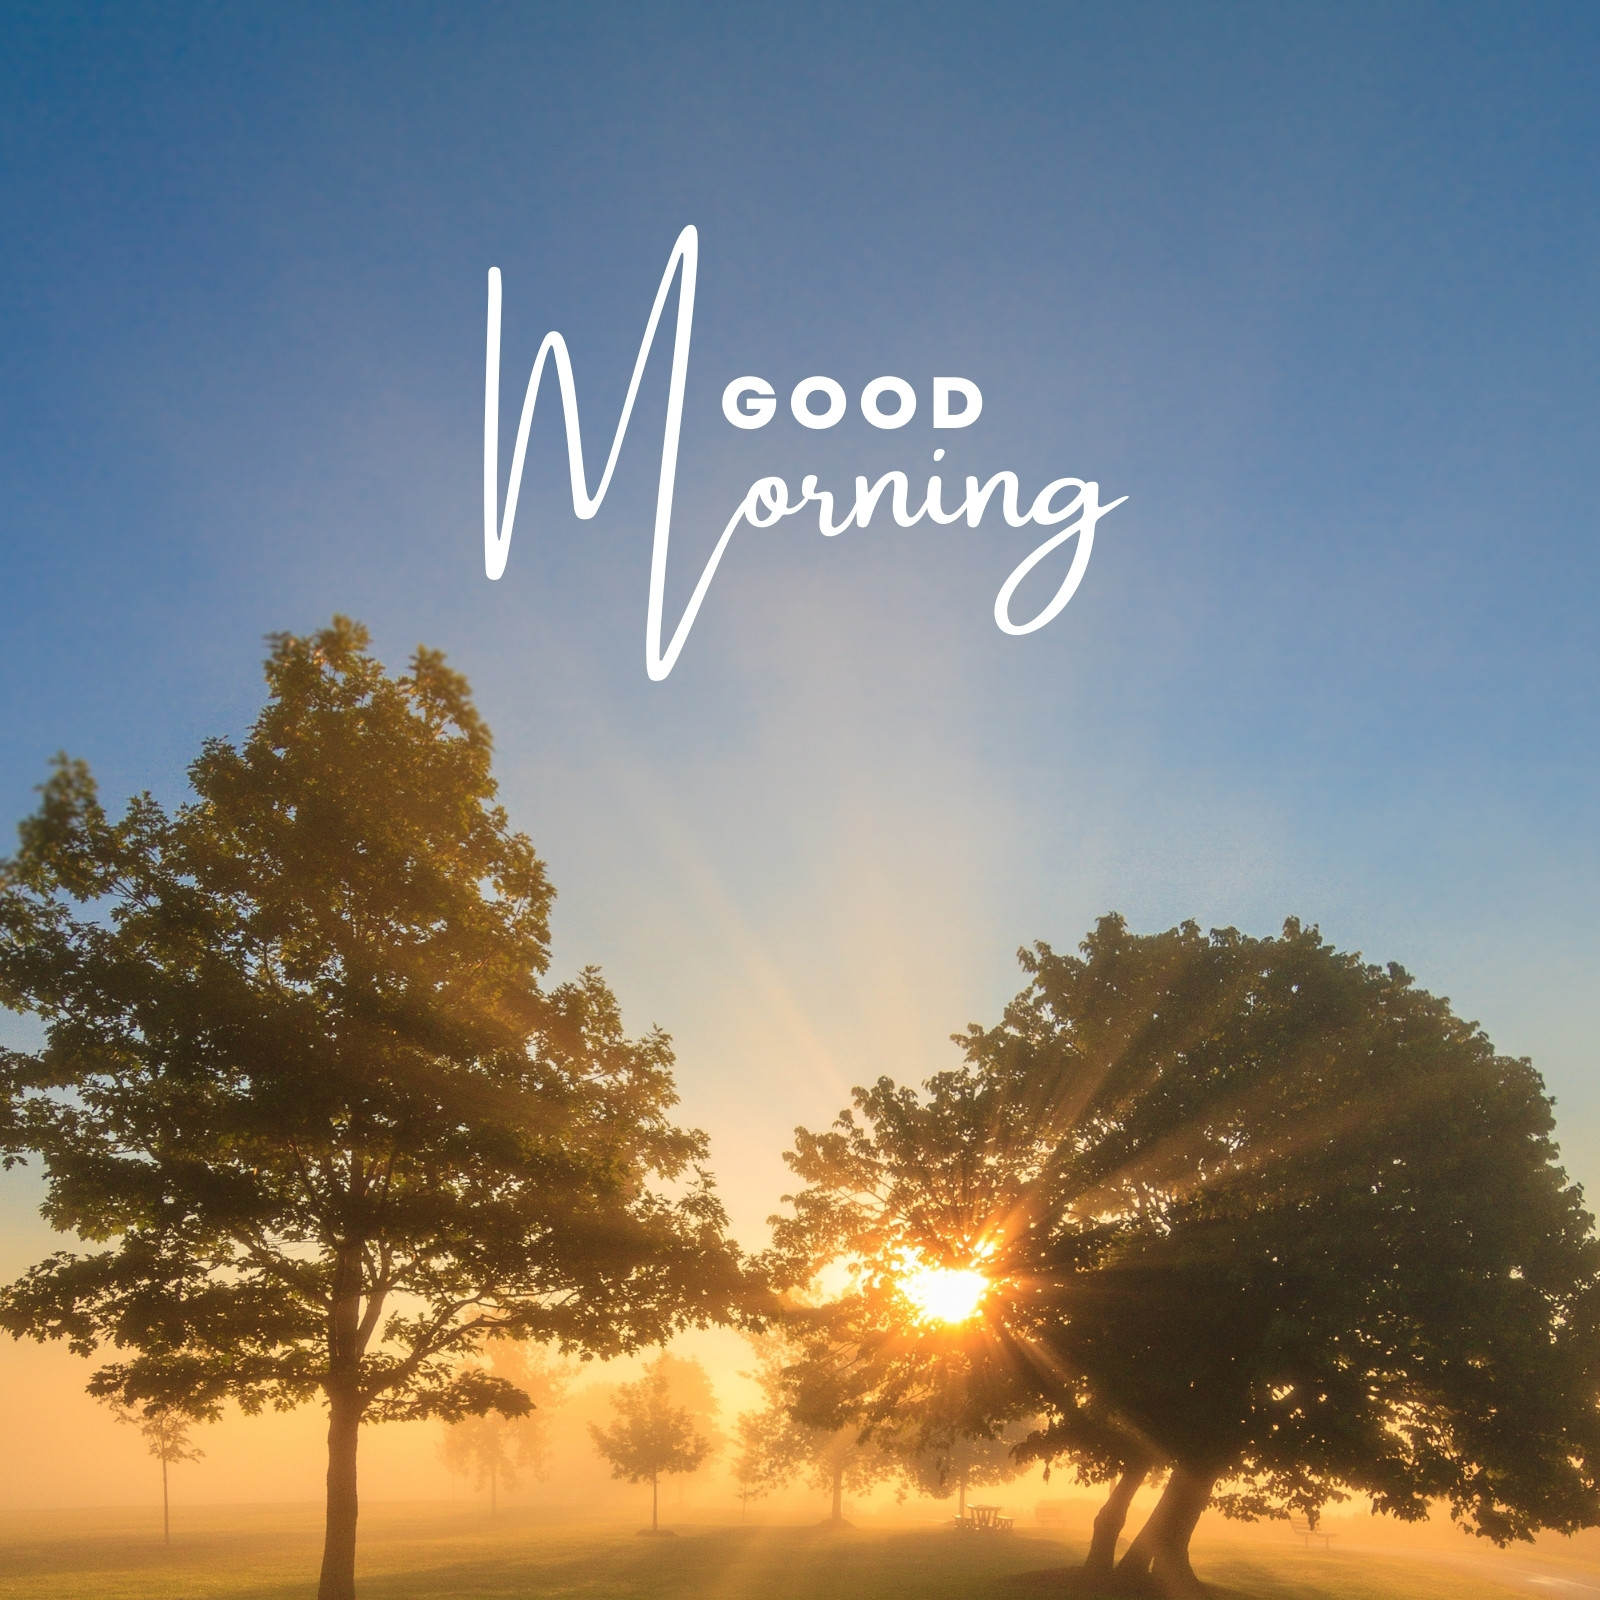 Page 6 - Free and customizable good morning wallpaper templates